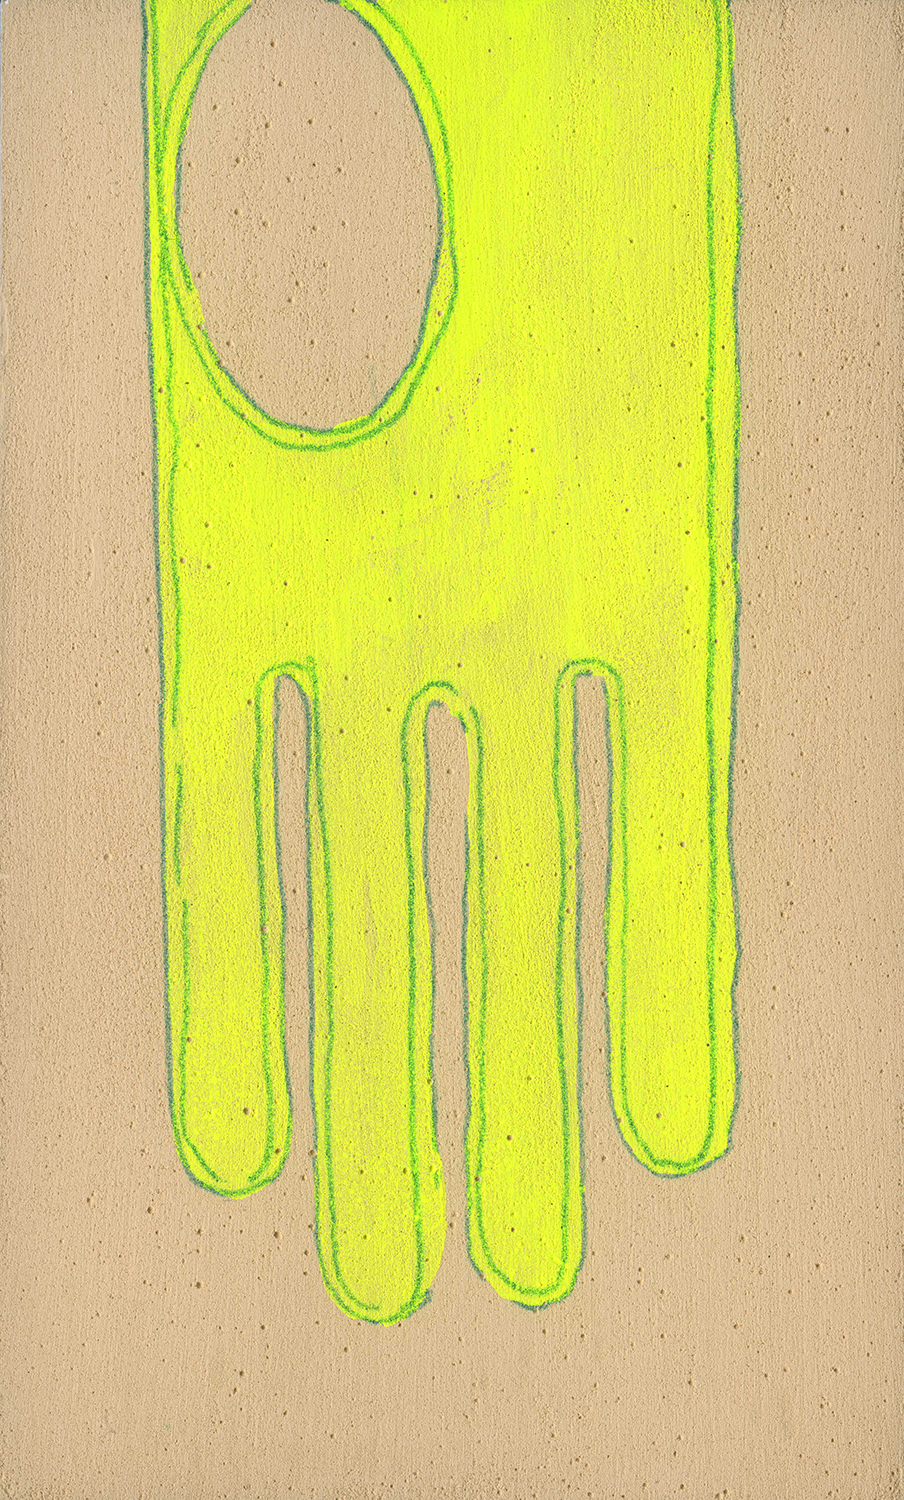 a neon yellow hand form on a tan background